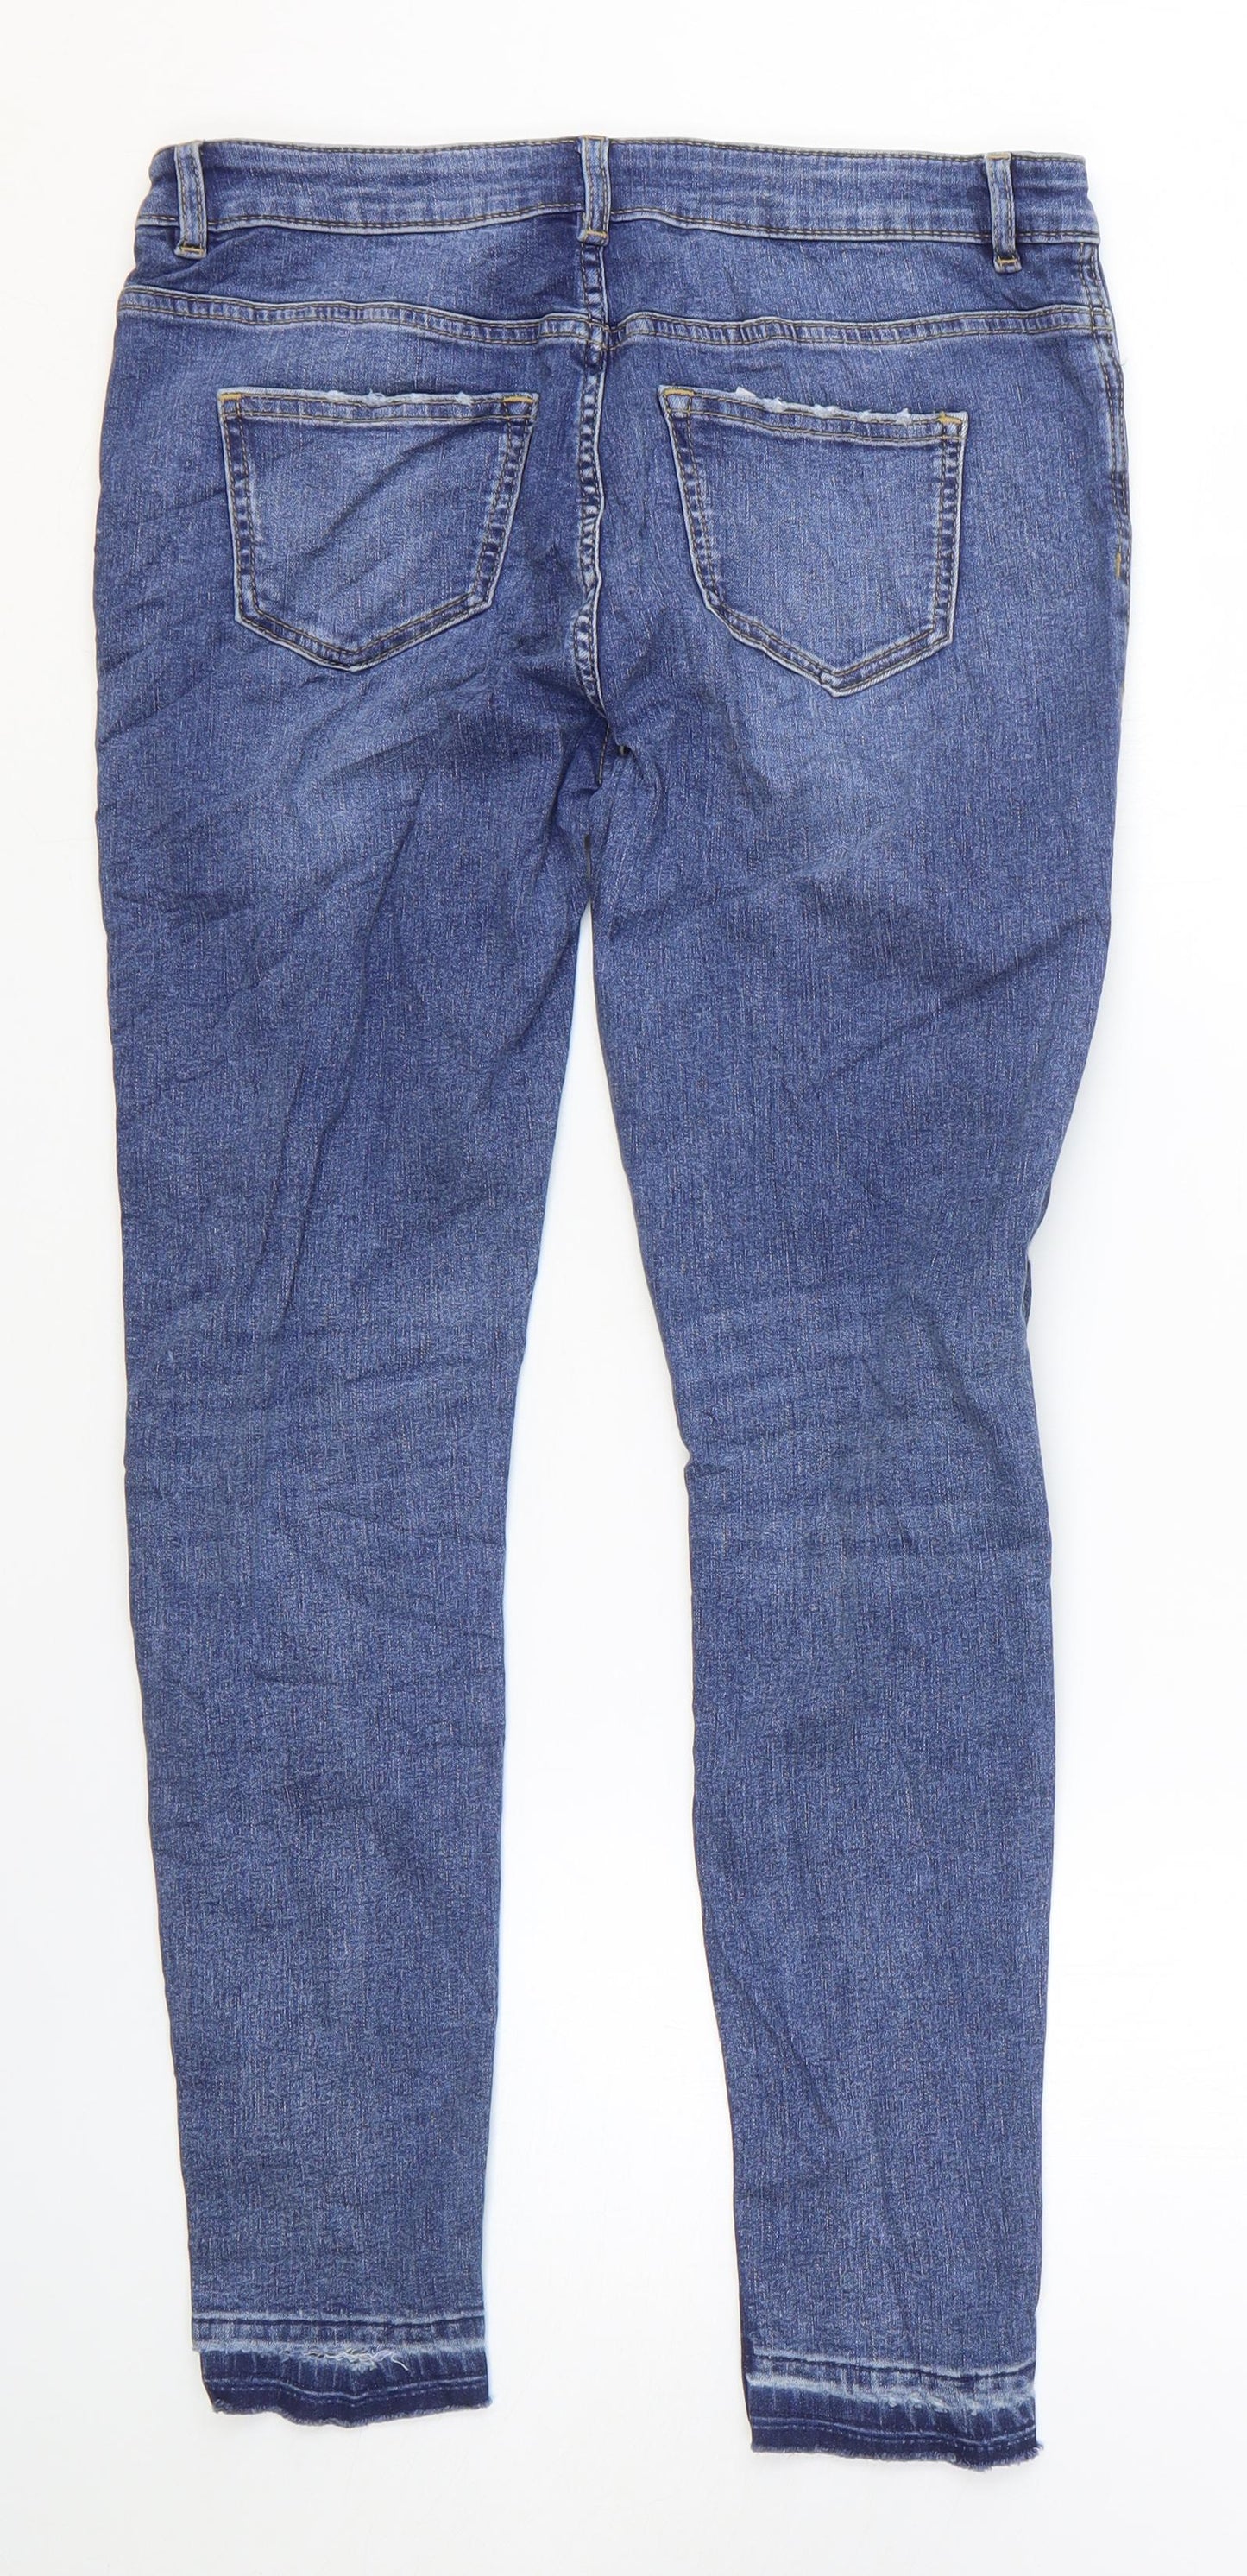 Marks and Spencer Girls Blue Cotton Skinny Jeans Size 13-14 Years Regular Zip